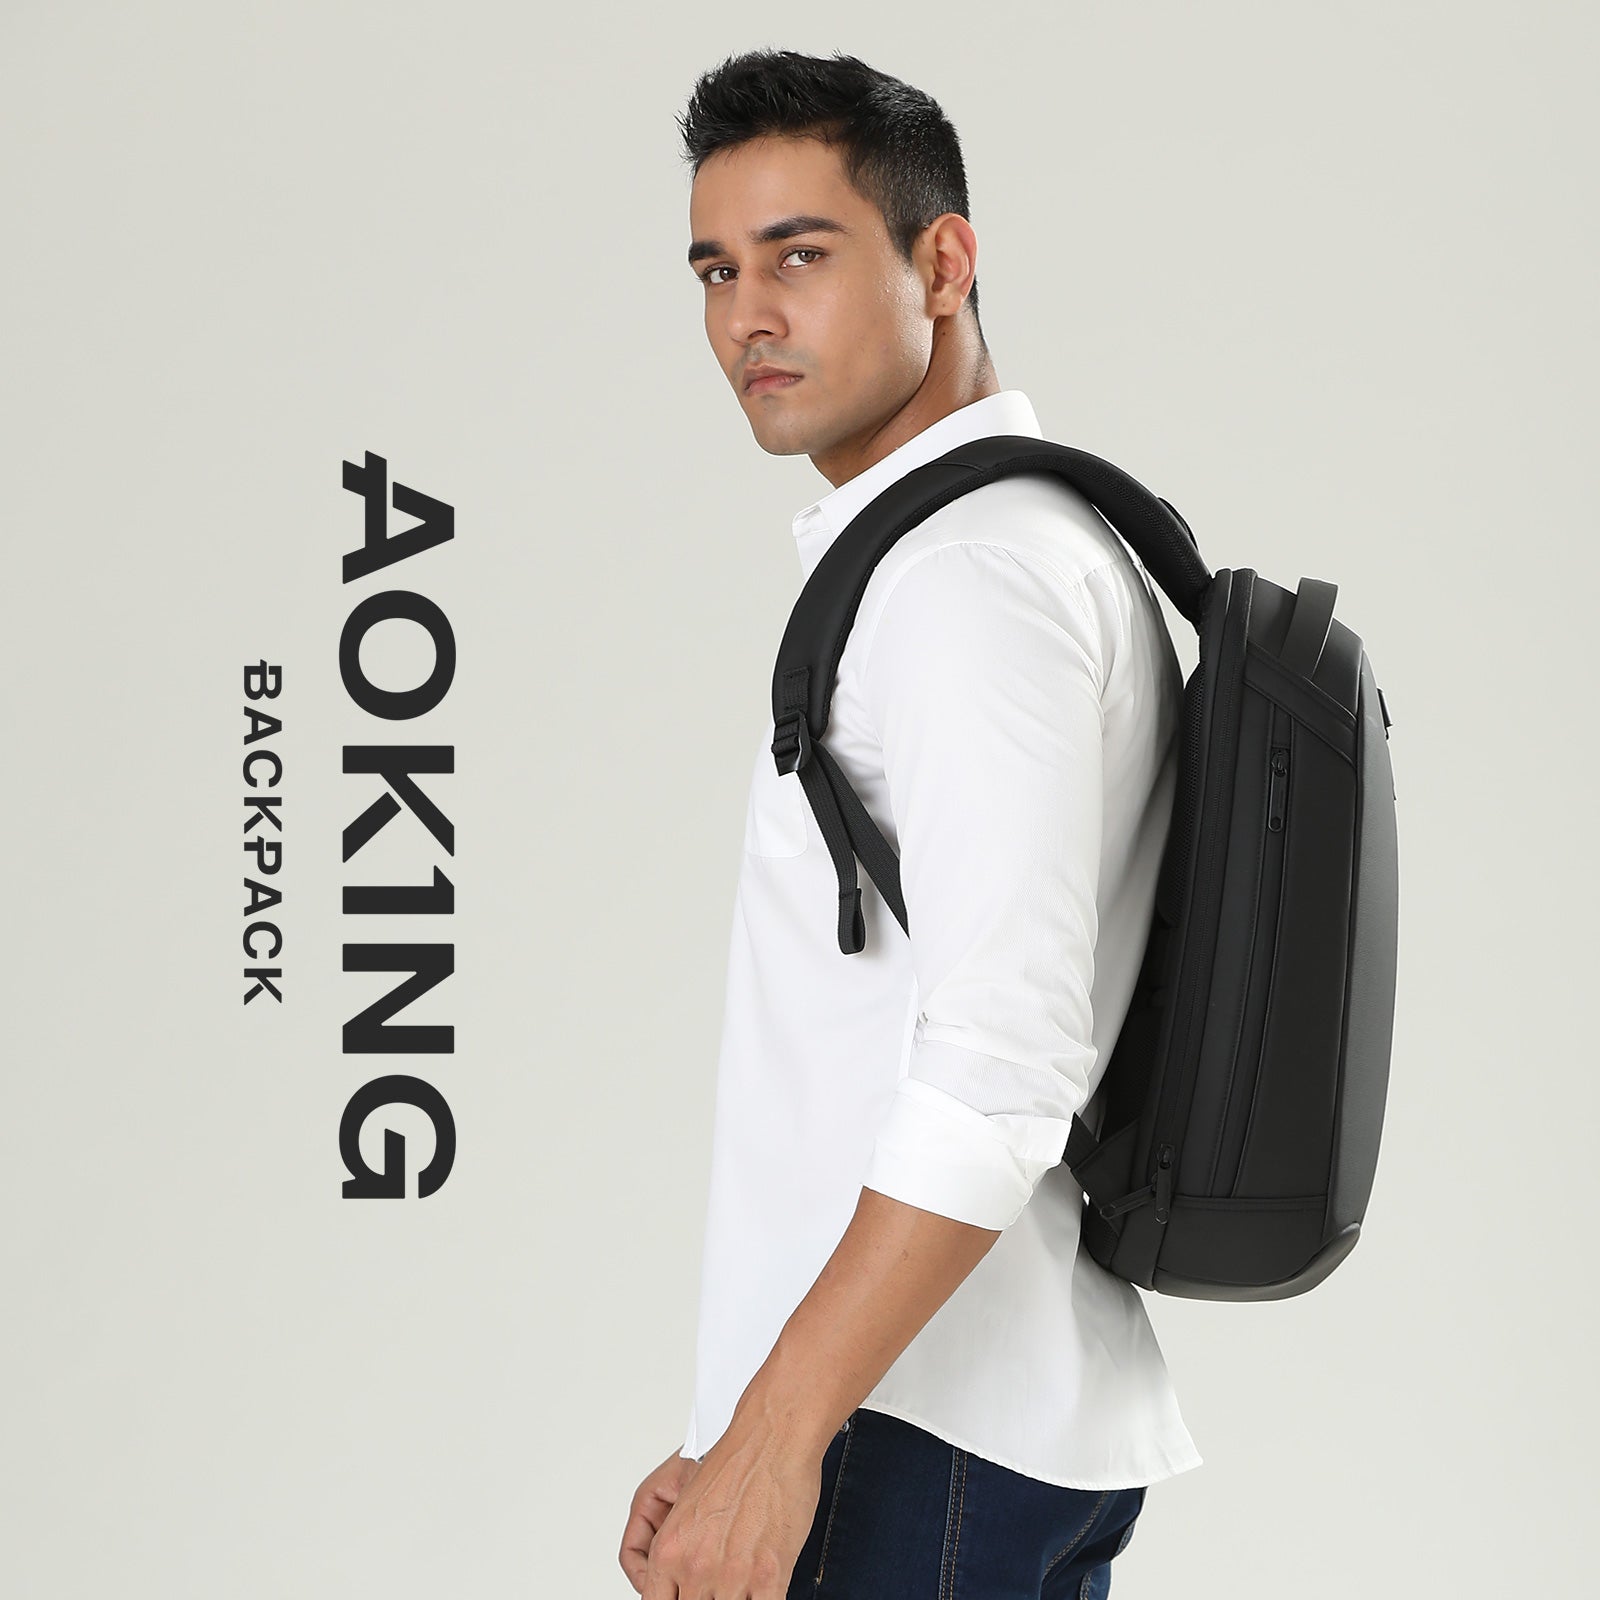 Aoking Fashion Backpack Laptop Business Backpack SN4006